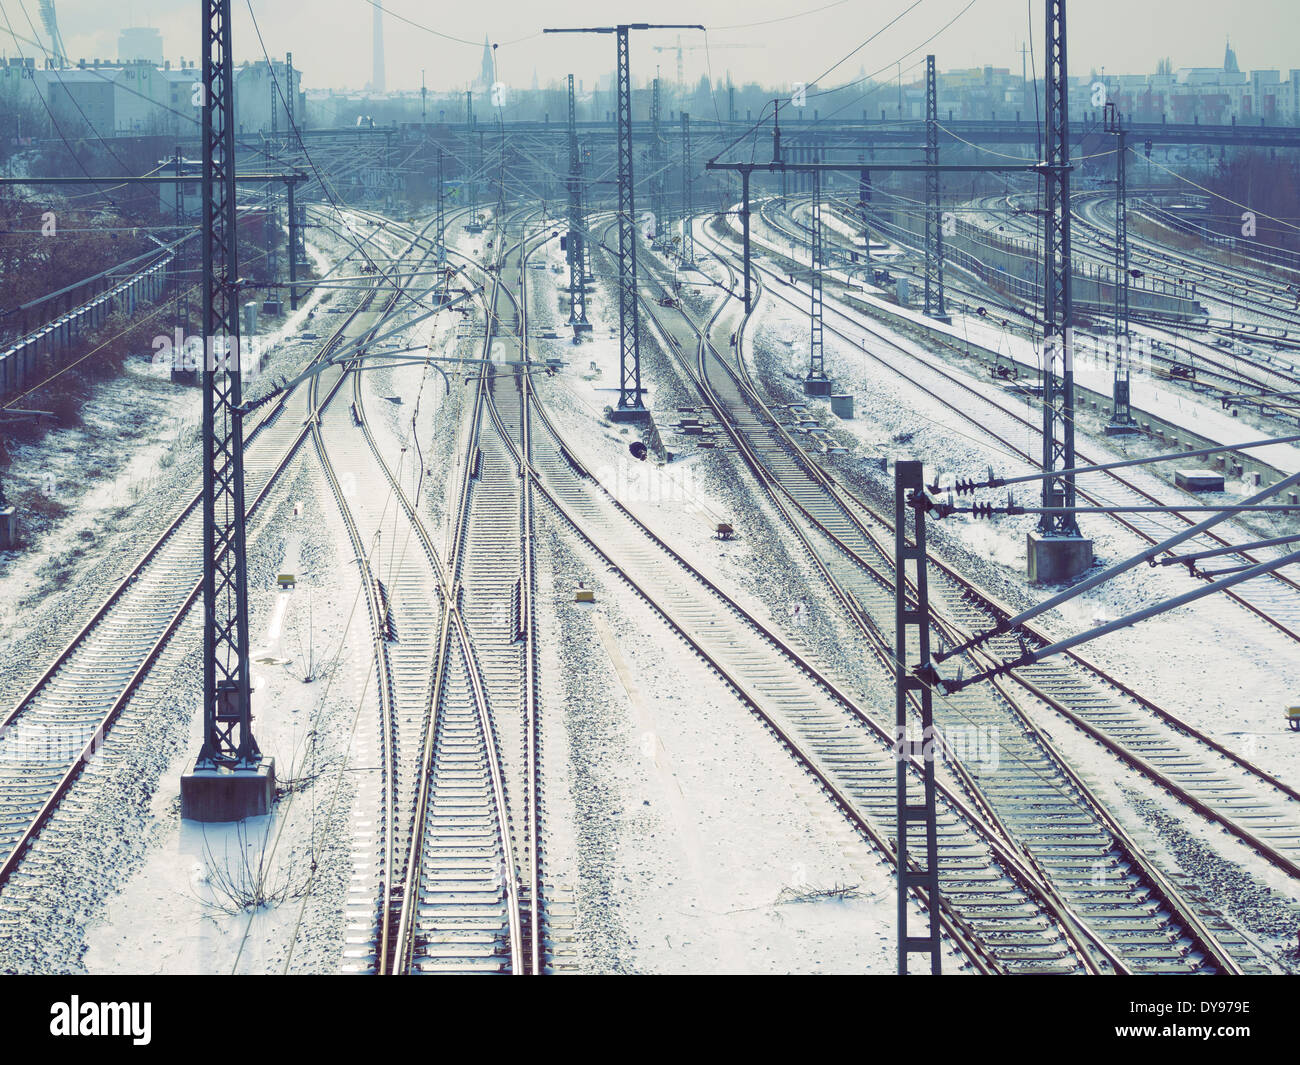 complicated urban railway system by winter time Stock Photo